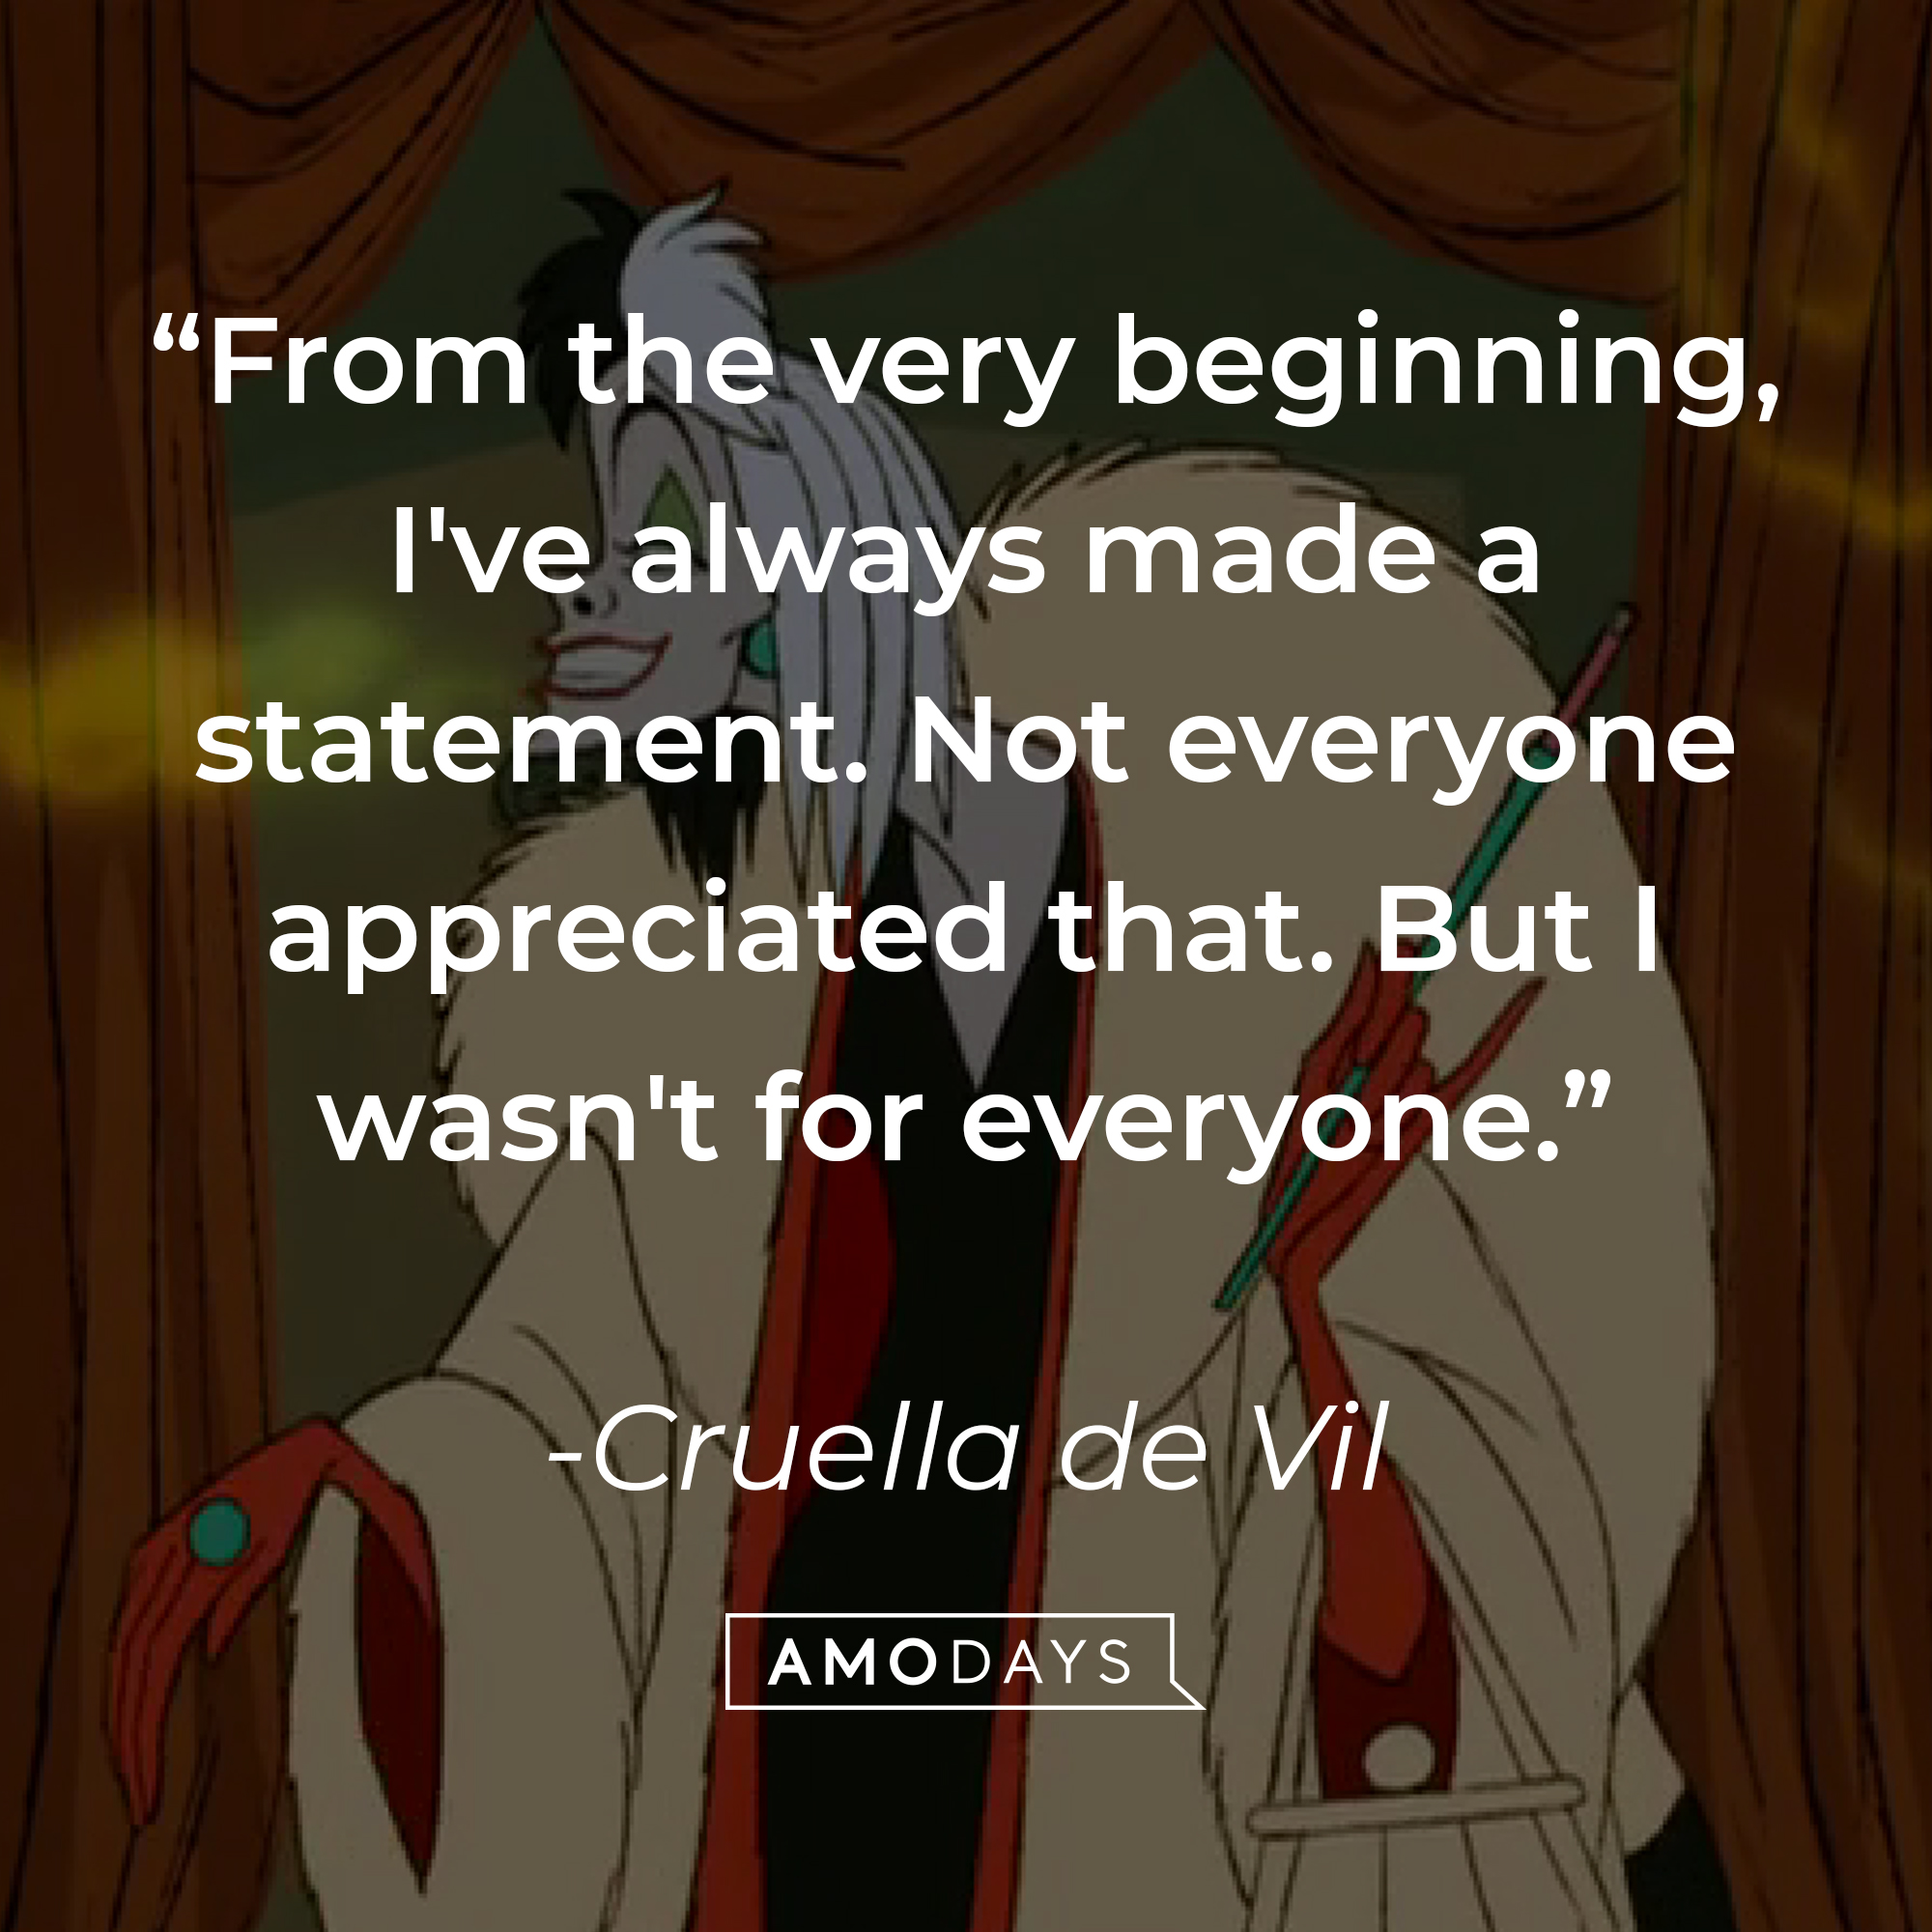 An image of the animated Cruella de Vil, with a quote from the same adapted character in the film 2021 “Cruella”: “From the very beginning, I've always made a statement. Not everyone appreciated that. But I wasn't for everyone.” |  Source: Facebook.com/DisneyCruellaDeVil